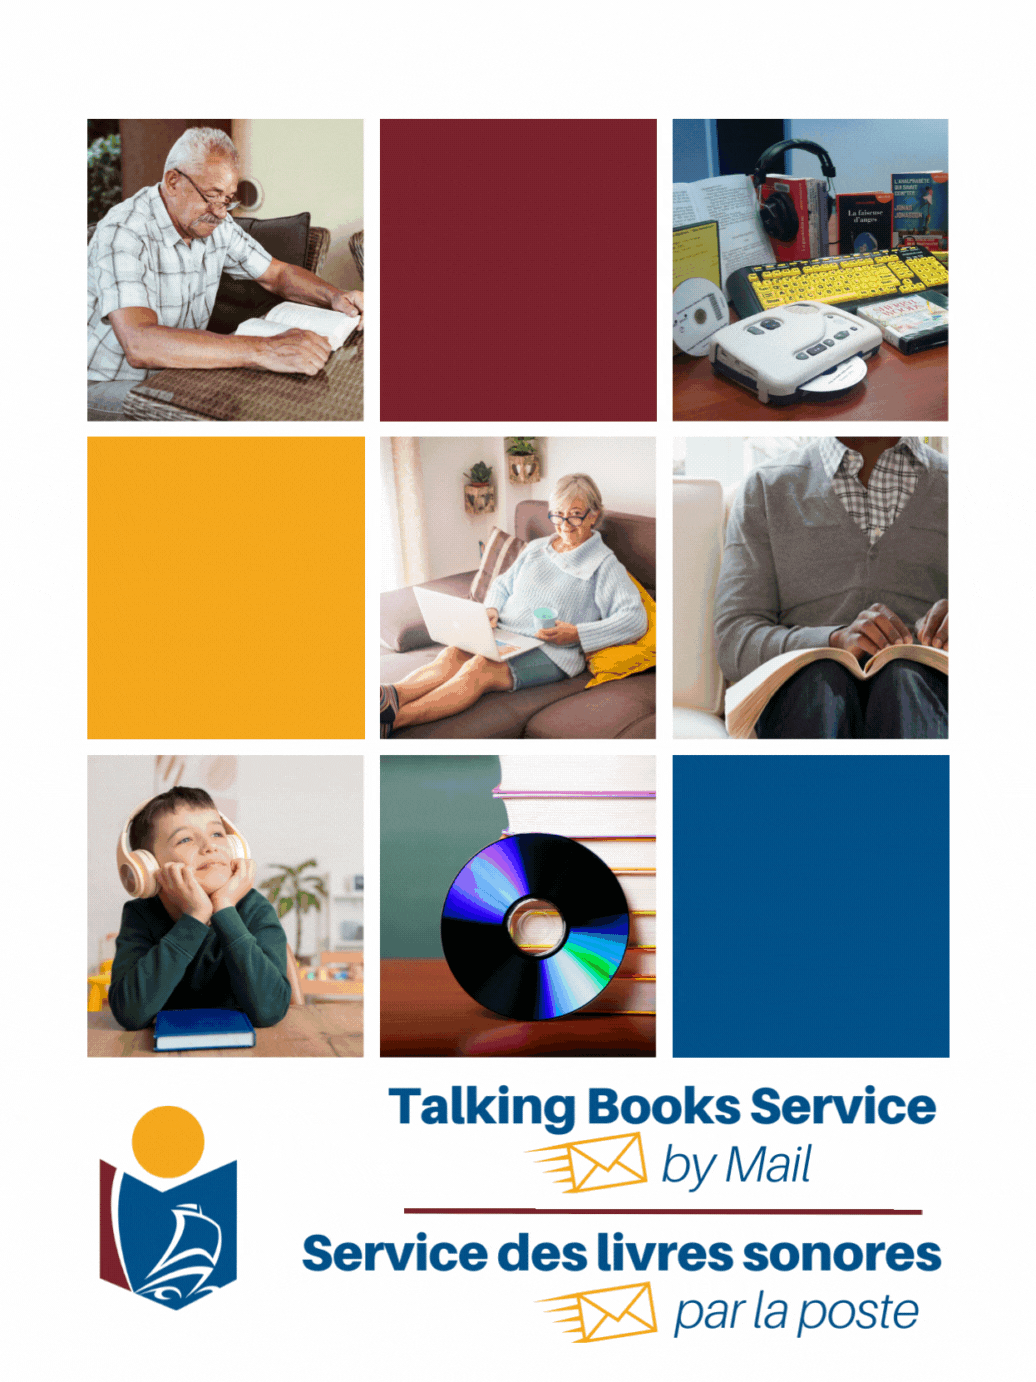 Talking Books Service by Mail